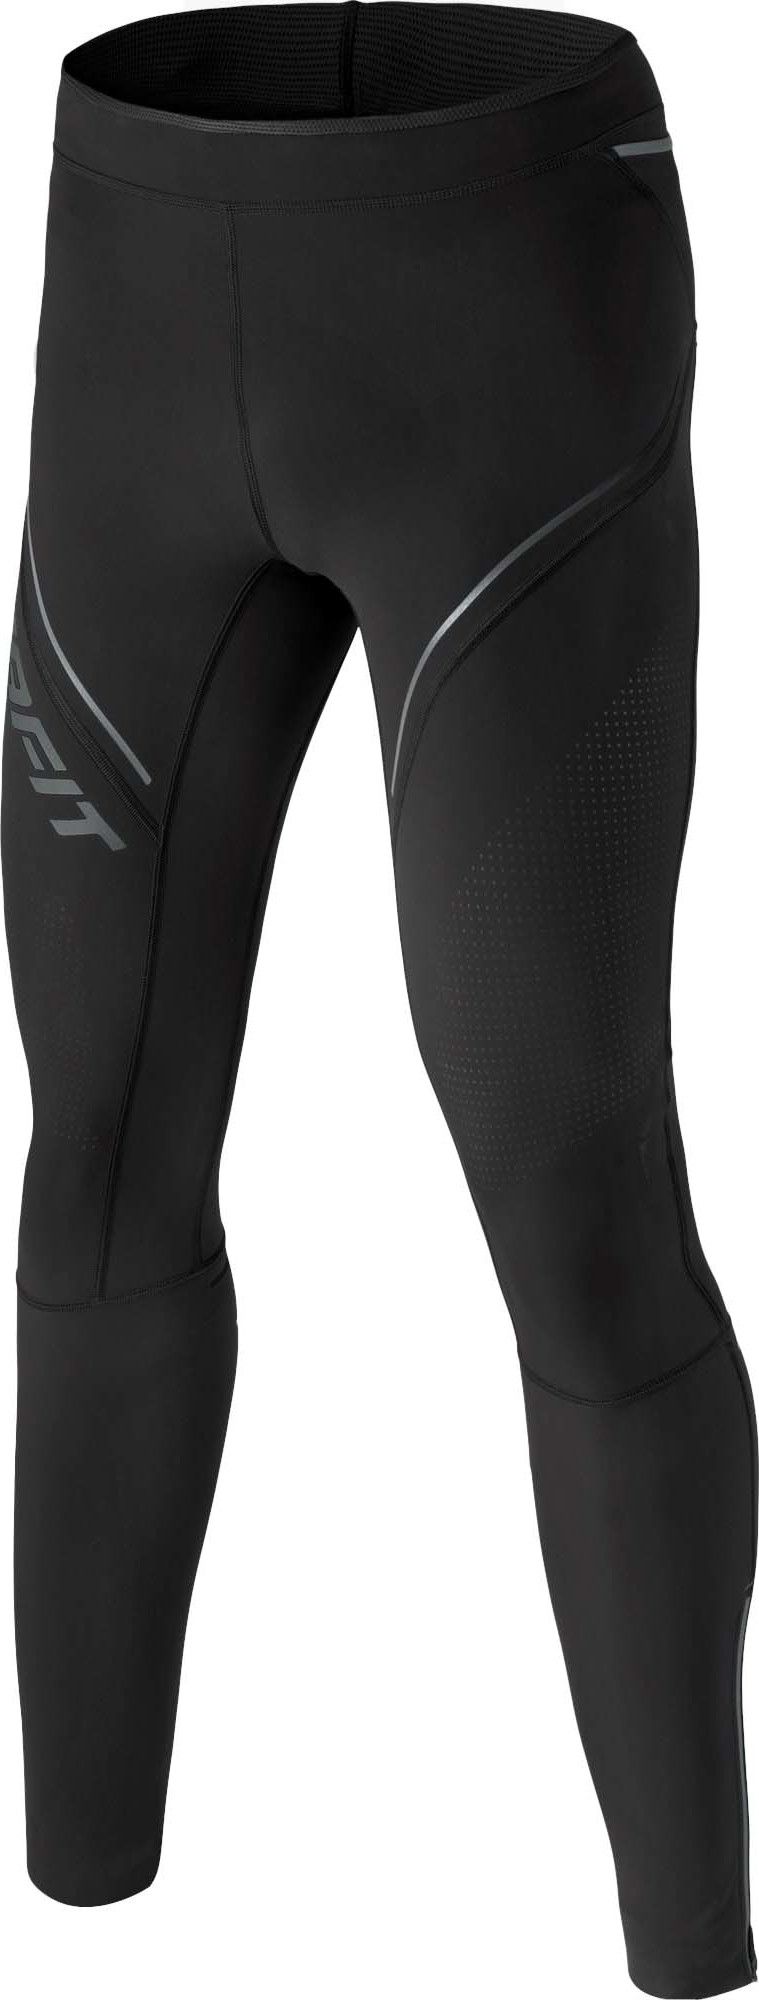 Dynafit Men's Winter Running Tights Black Out